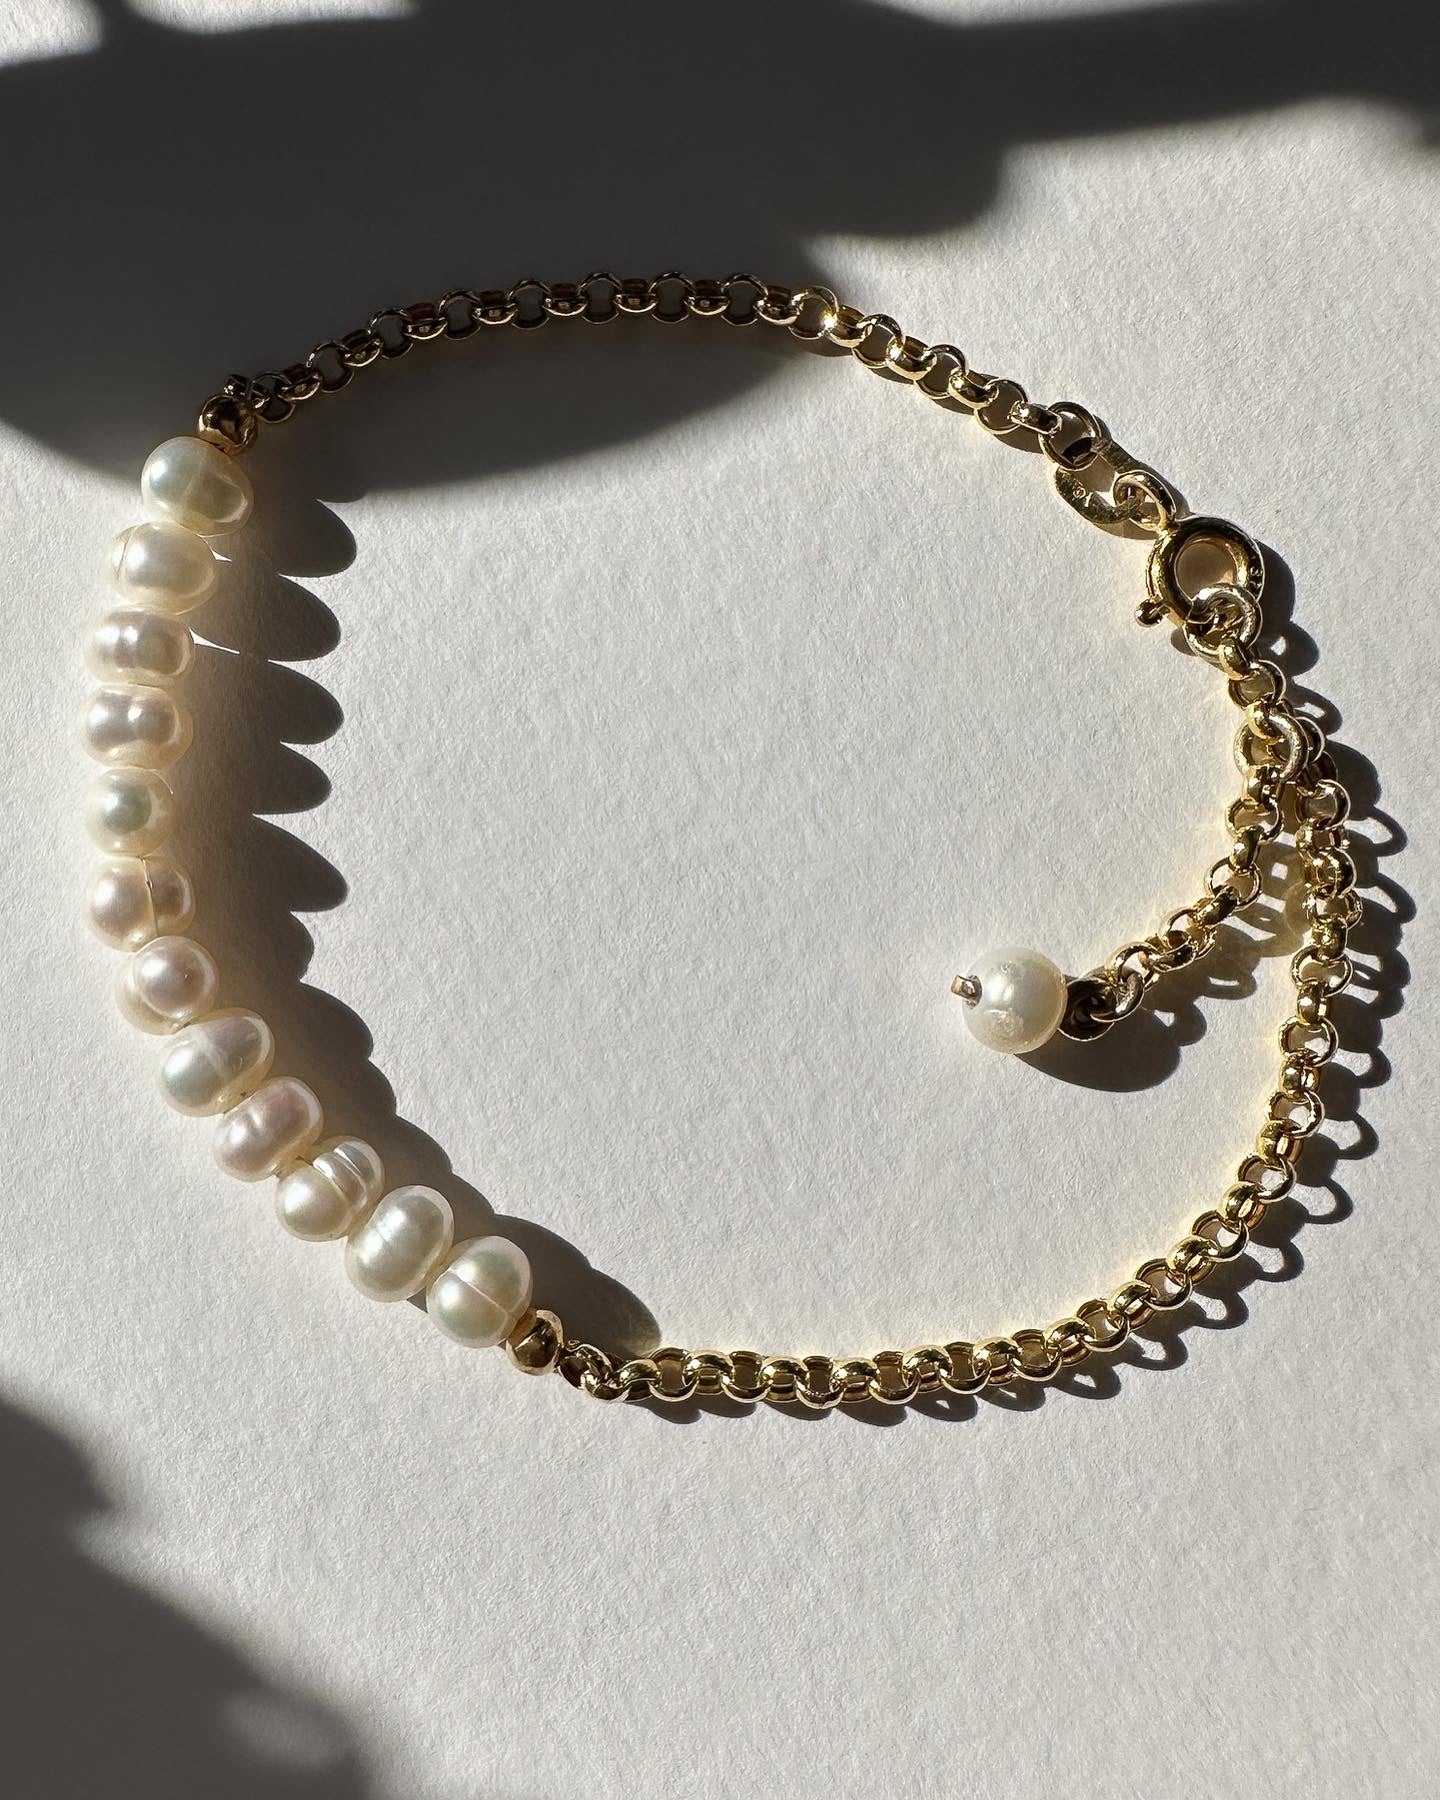 gold bracelet strung with natural pearls.